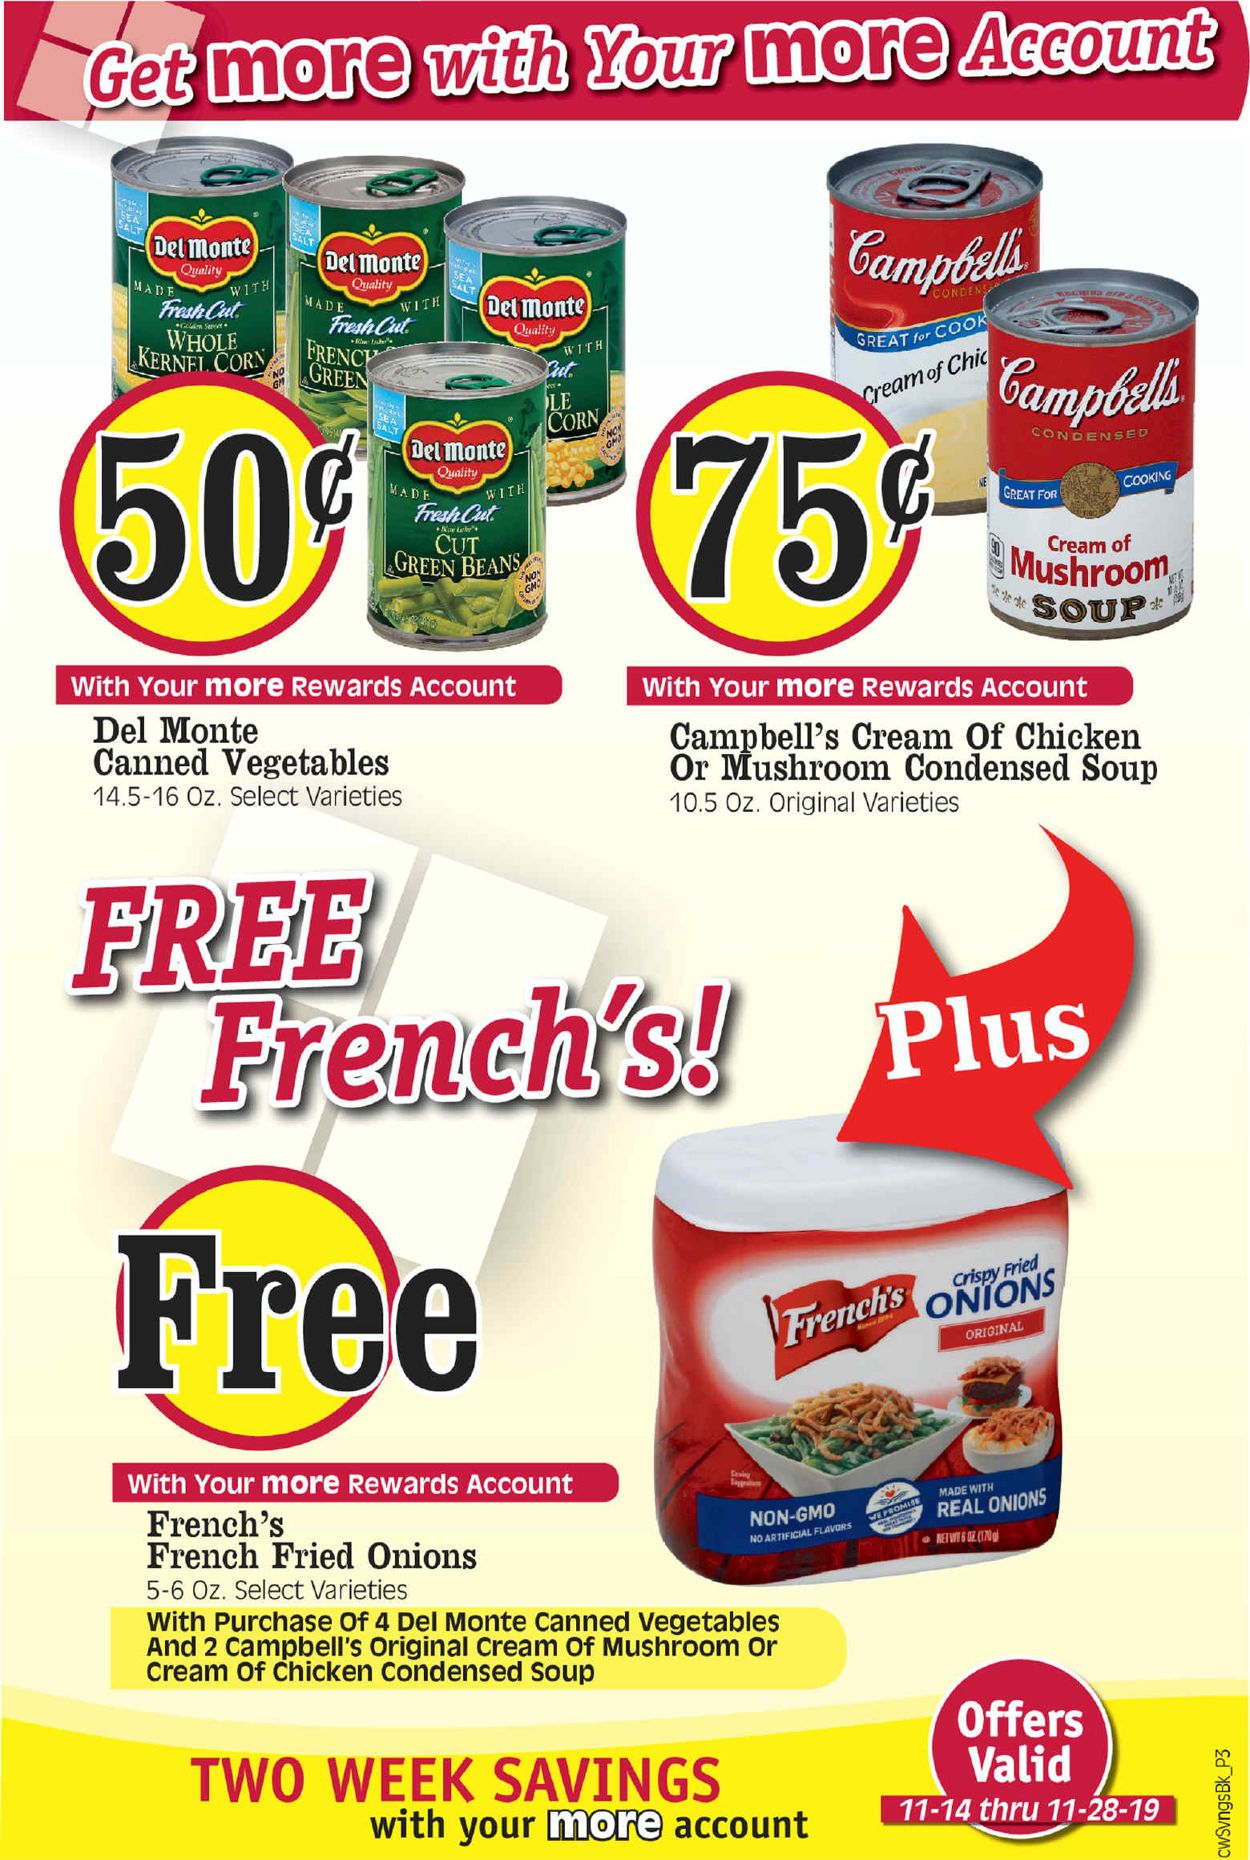 Cash Wise Weekly Ad Circular - valid 11/14-11/28/2019 (Page 3)